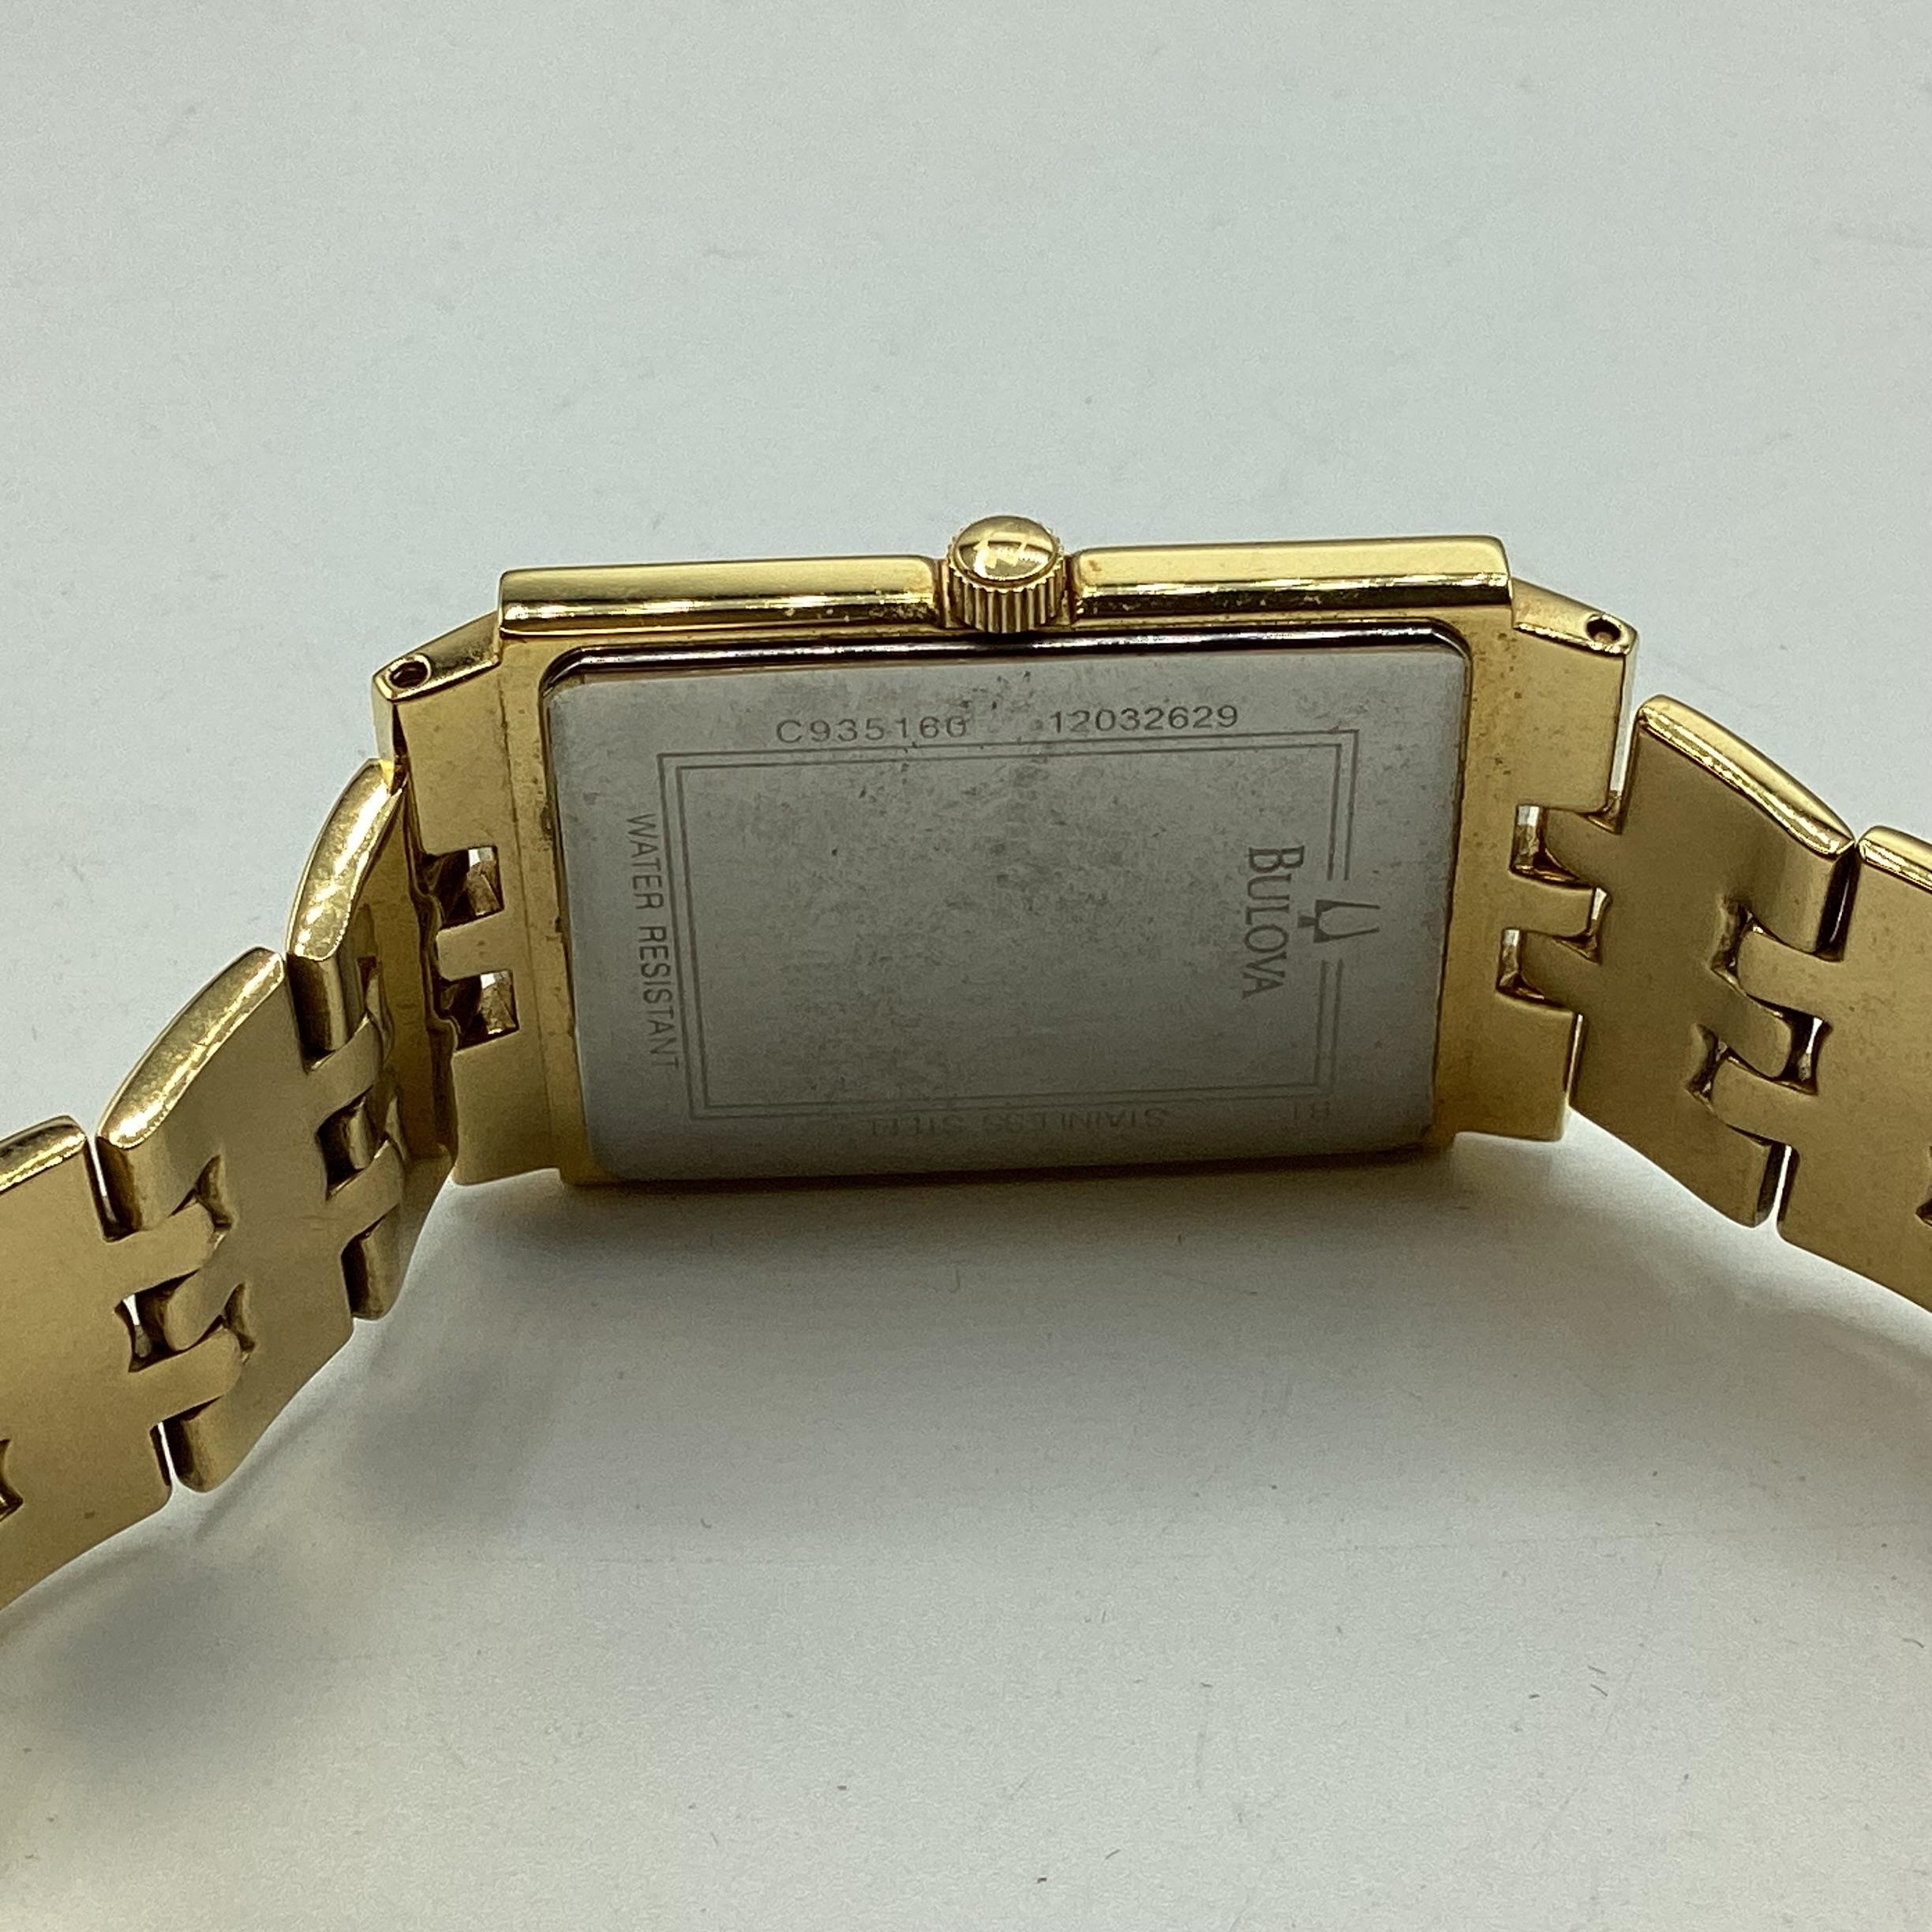 A boxed watch, Bulova, as found, not tested - Image 3 of 5